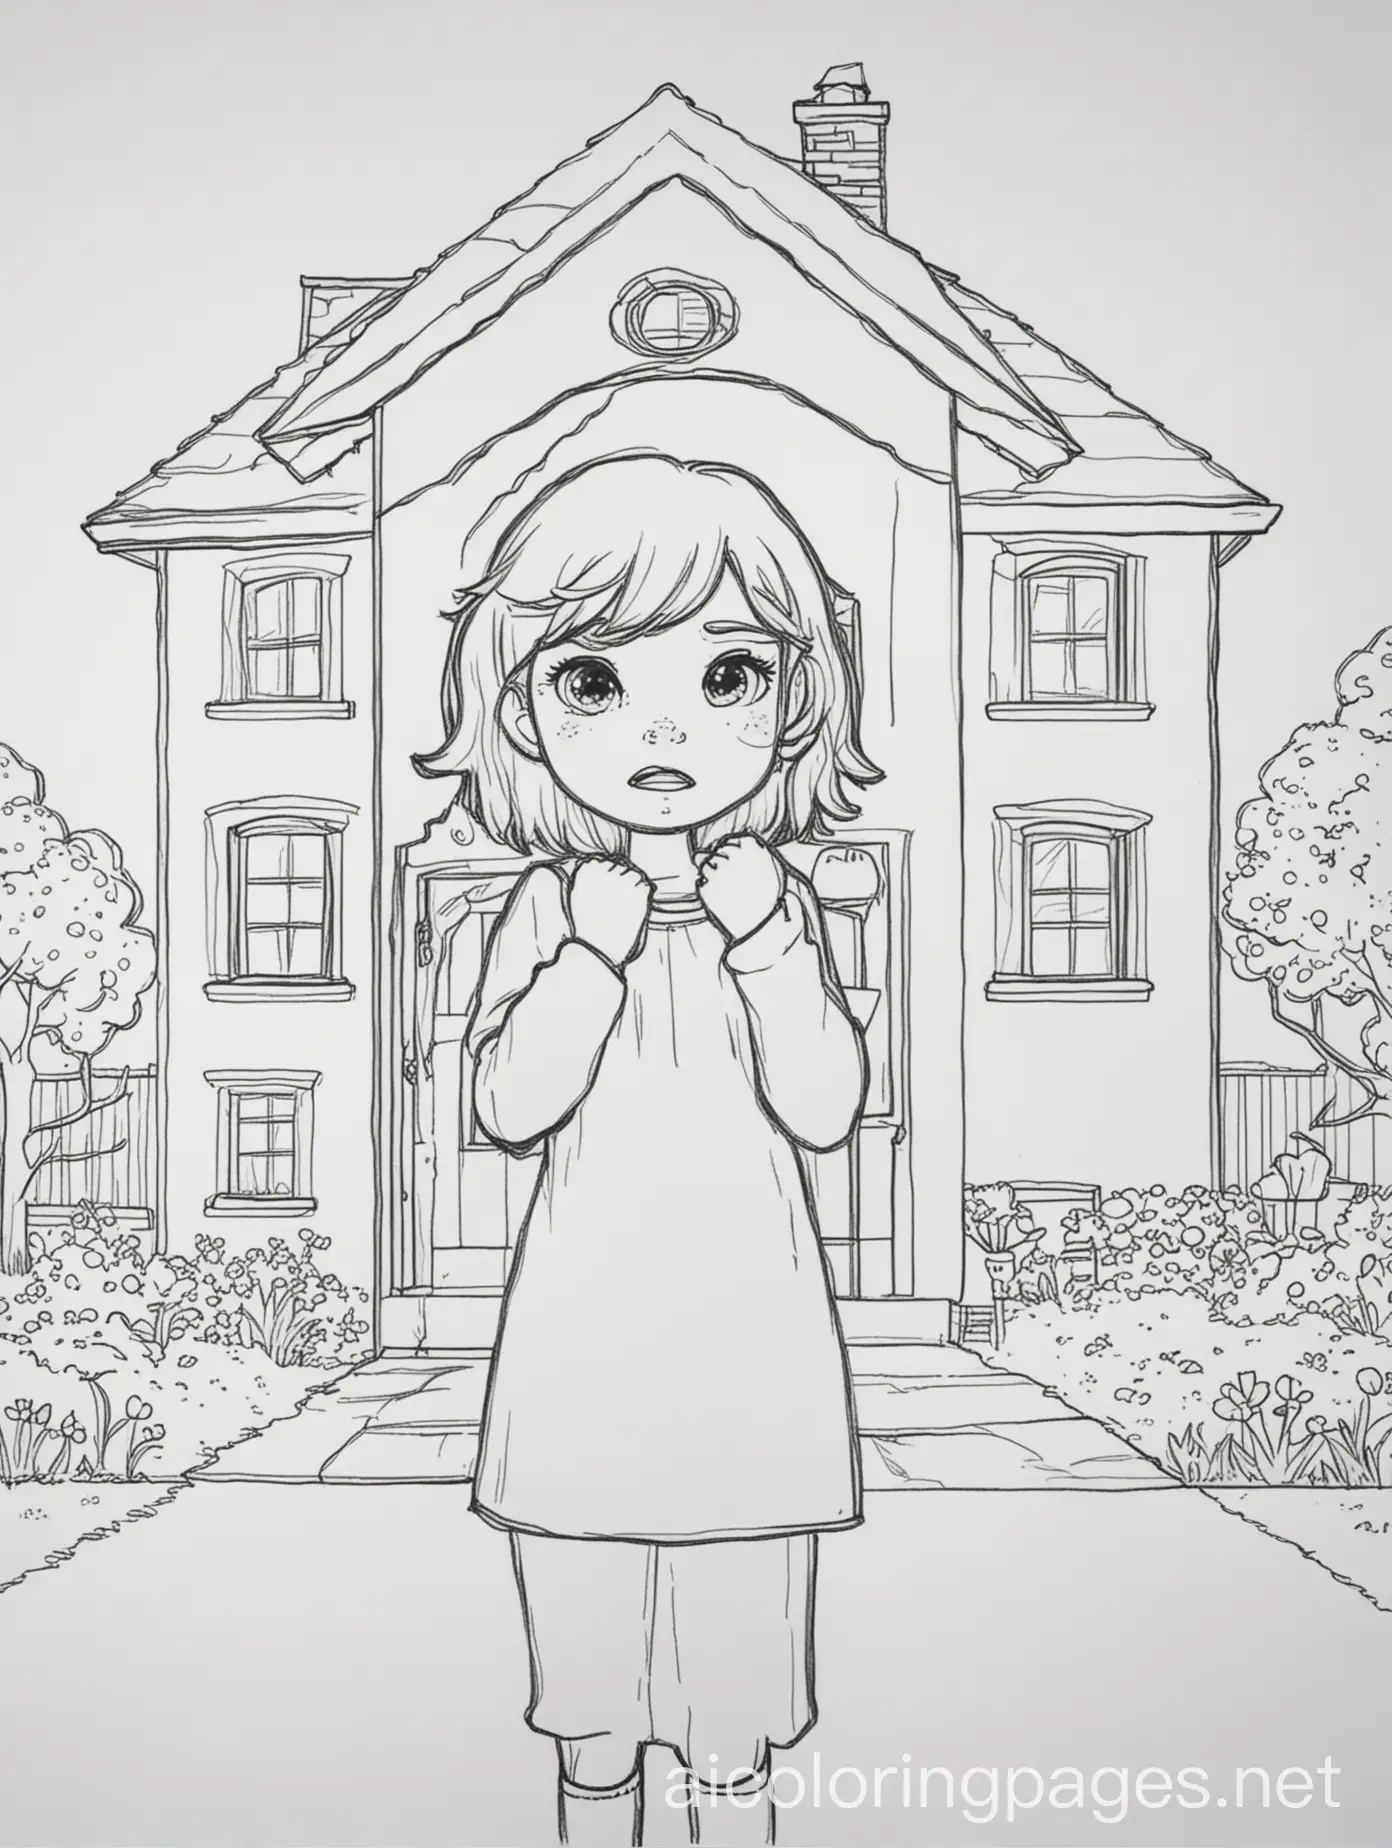 A girl standing with her fists up to her eyes crying with a house behind her. Coloring Page, black and white, line art, white background, Simplicity, Ample White Space. , making it simple for kids to color without too much difficulty. Very simple design. Big lines with no dark filling, Coloring Page, black and white, line art, white background, Simplicity, Ample White Space. The background of the coloring page is plain white to make it easy for young children to color within the lines. The outlines of all the subjects are easy to distinguish, making it simple for kids to color without too much difficulty